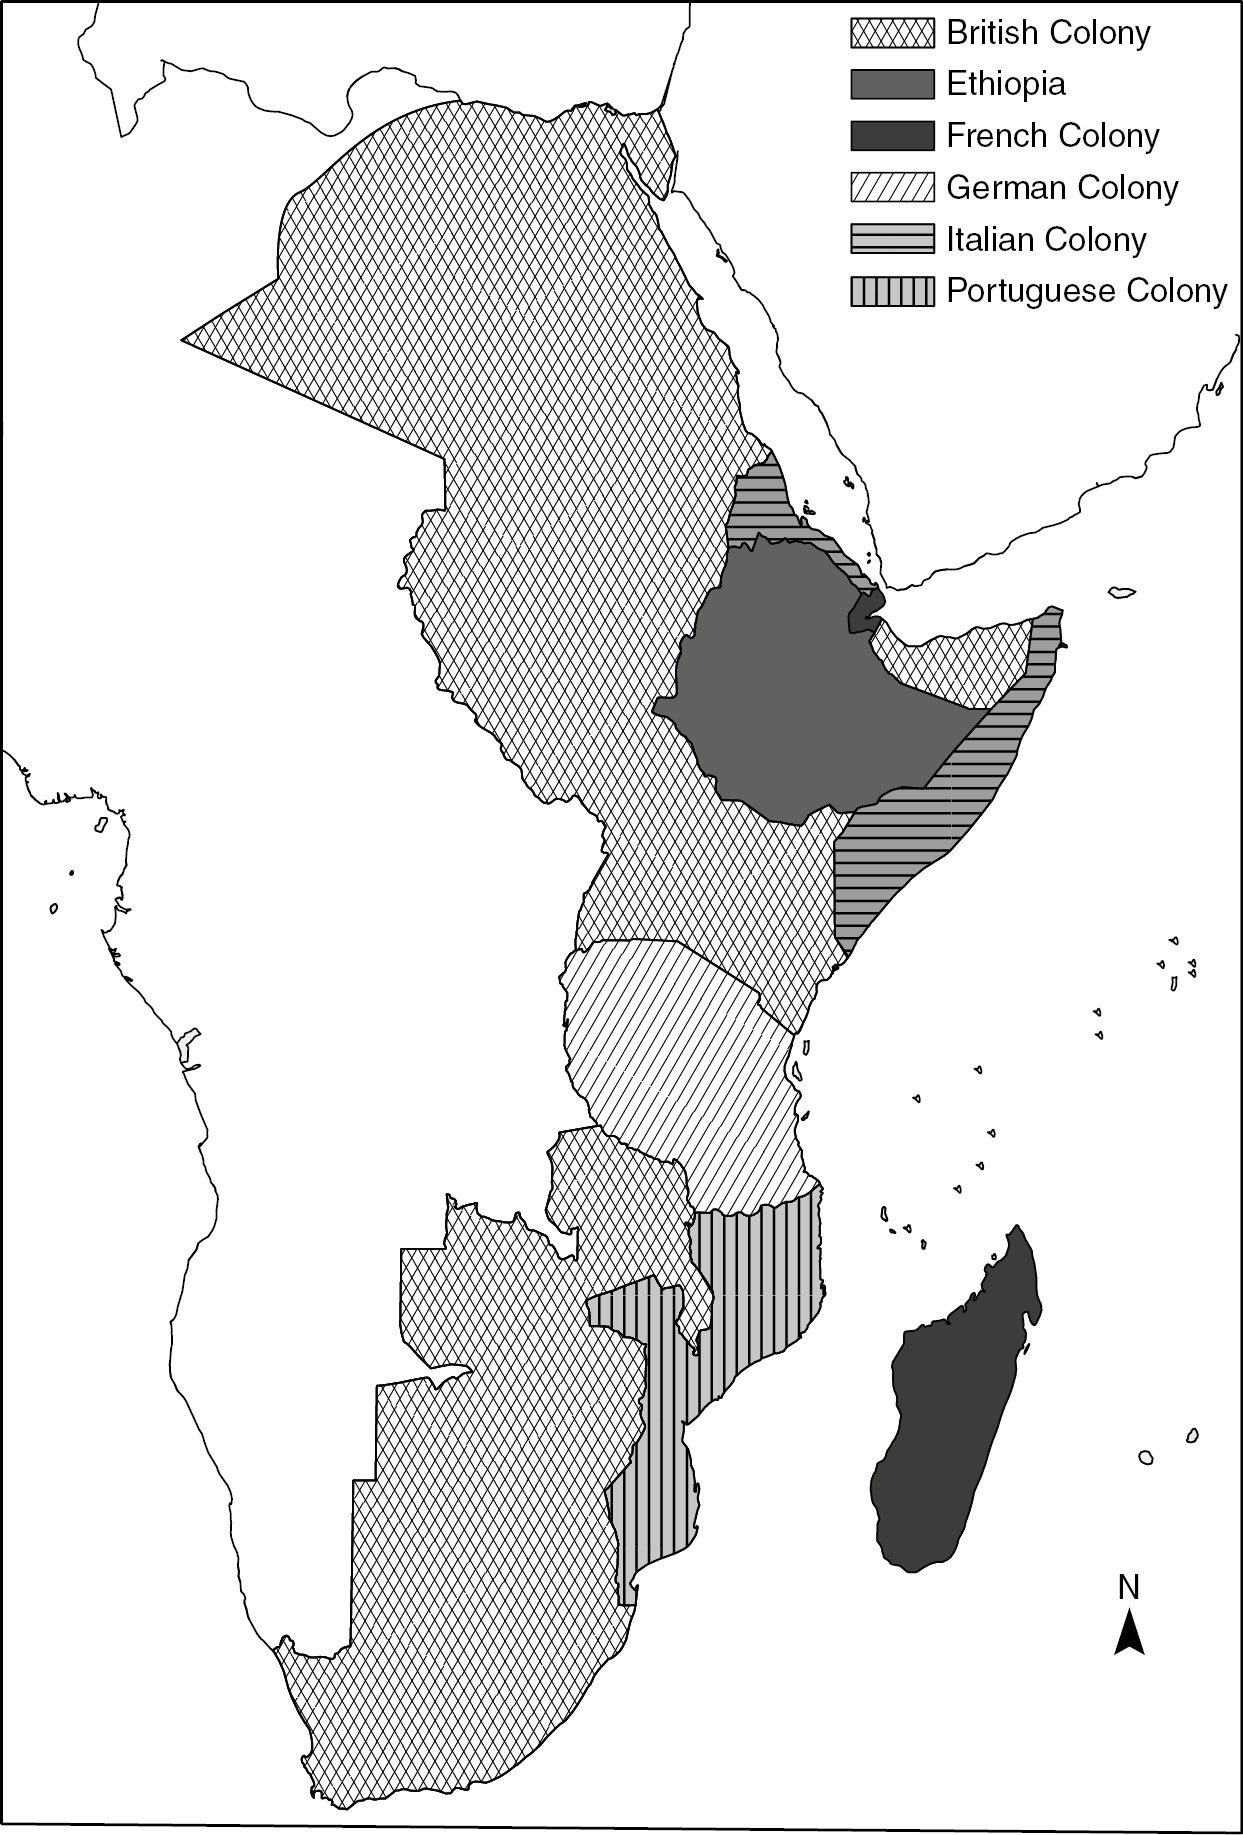 The Scramble For Indian Ocean Africa Chapter 11 Africa And The Indian Ocean World From Early Times To Circa 1900